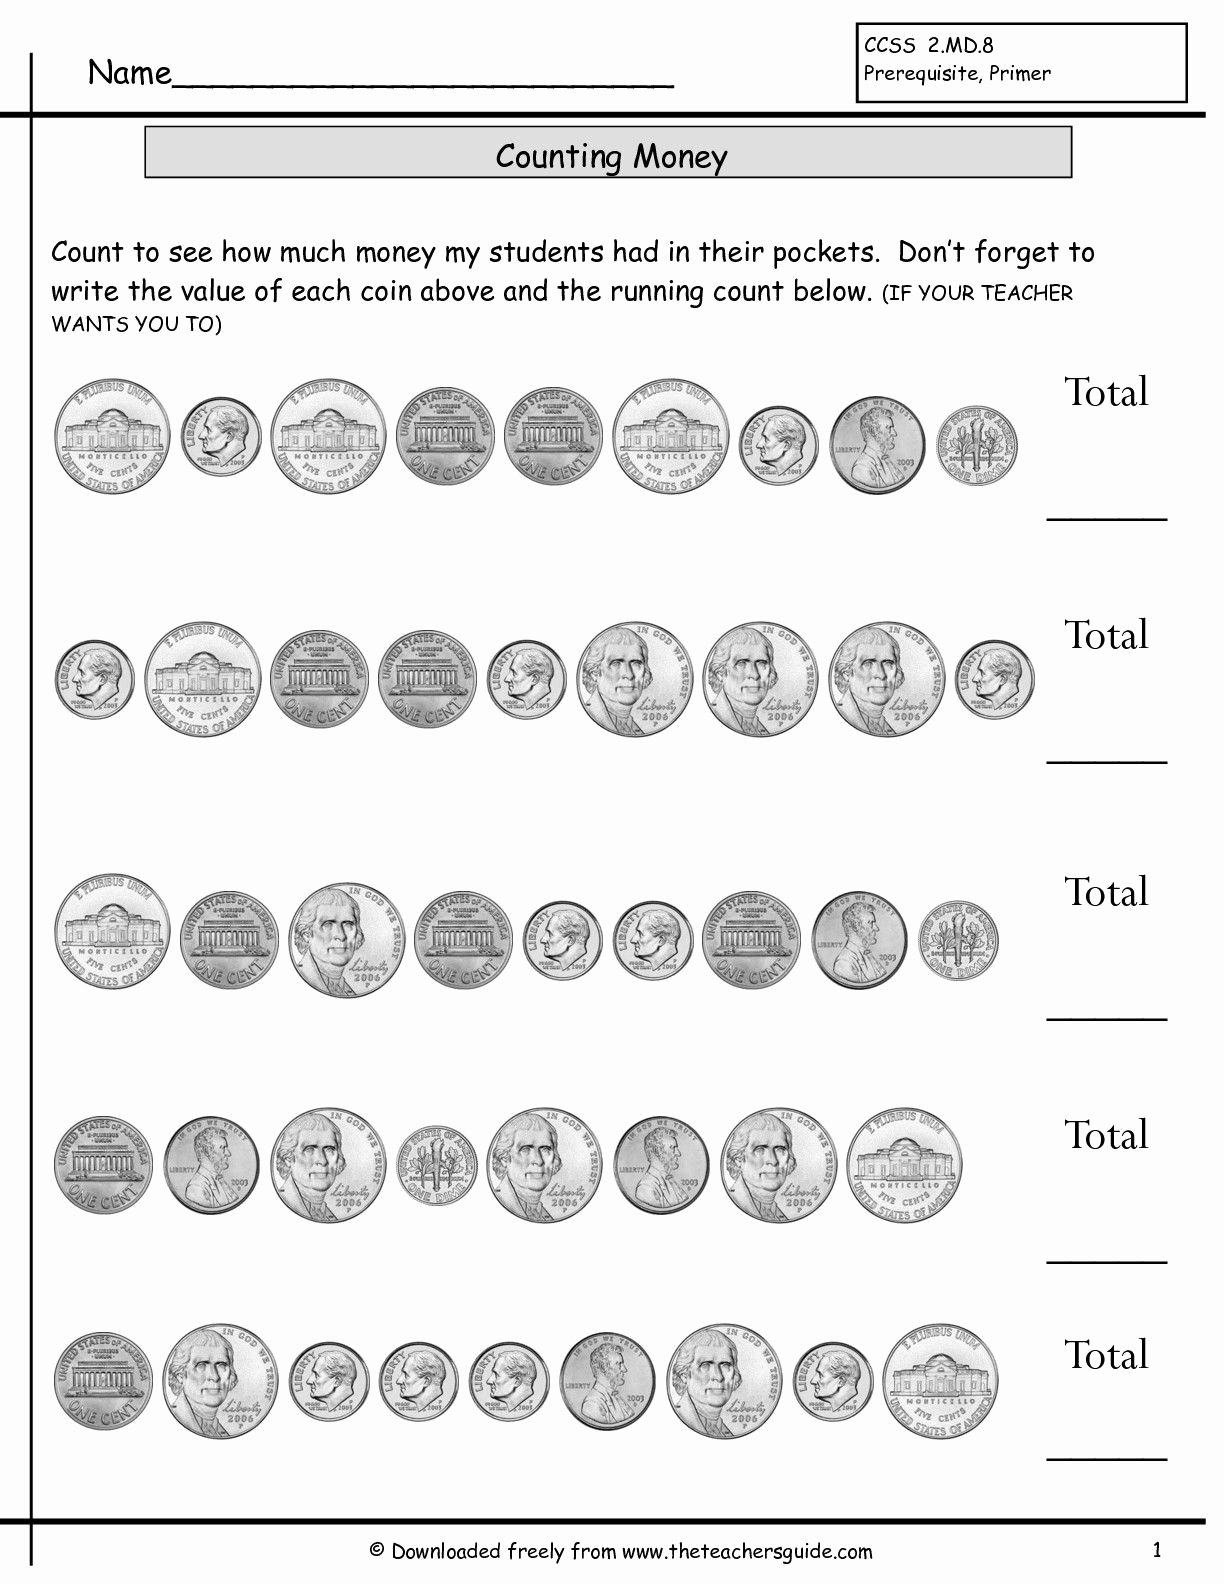 Counting Coins Worksheets Inspirational Mixed Coins Worksheet